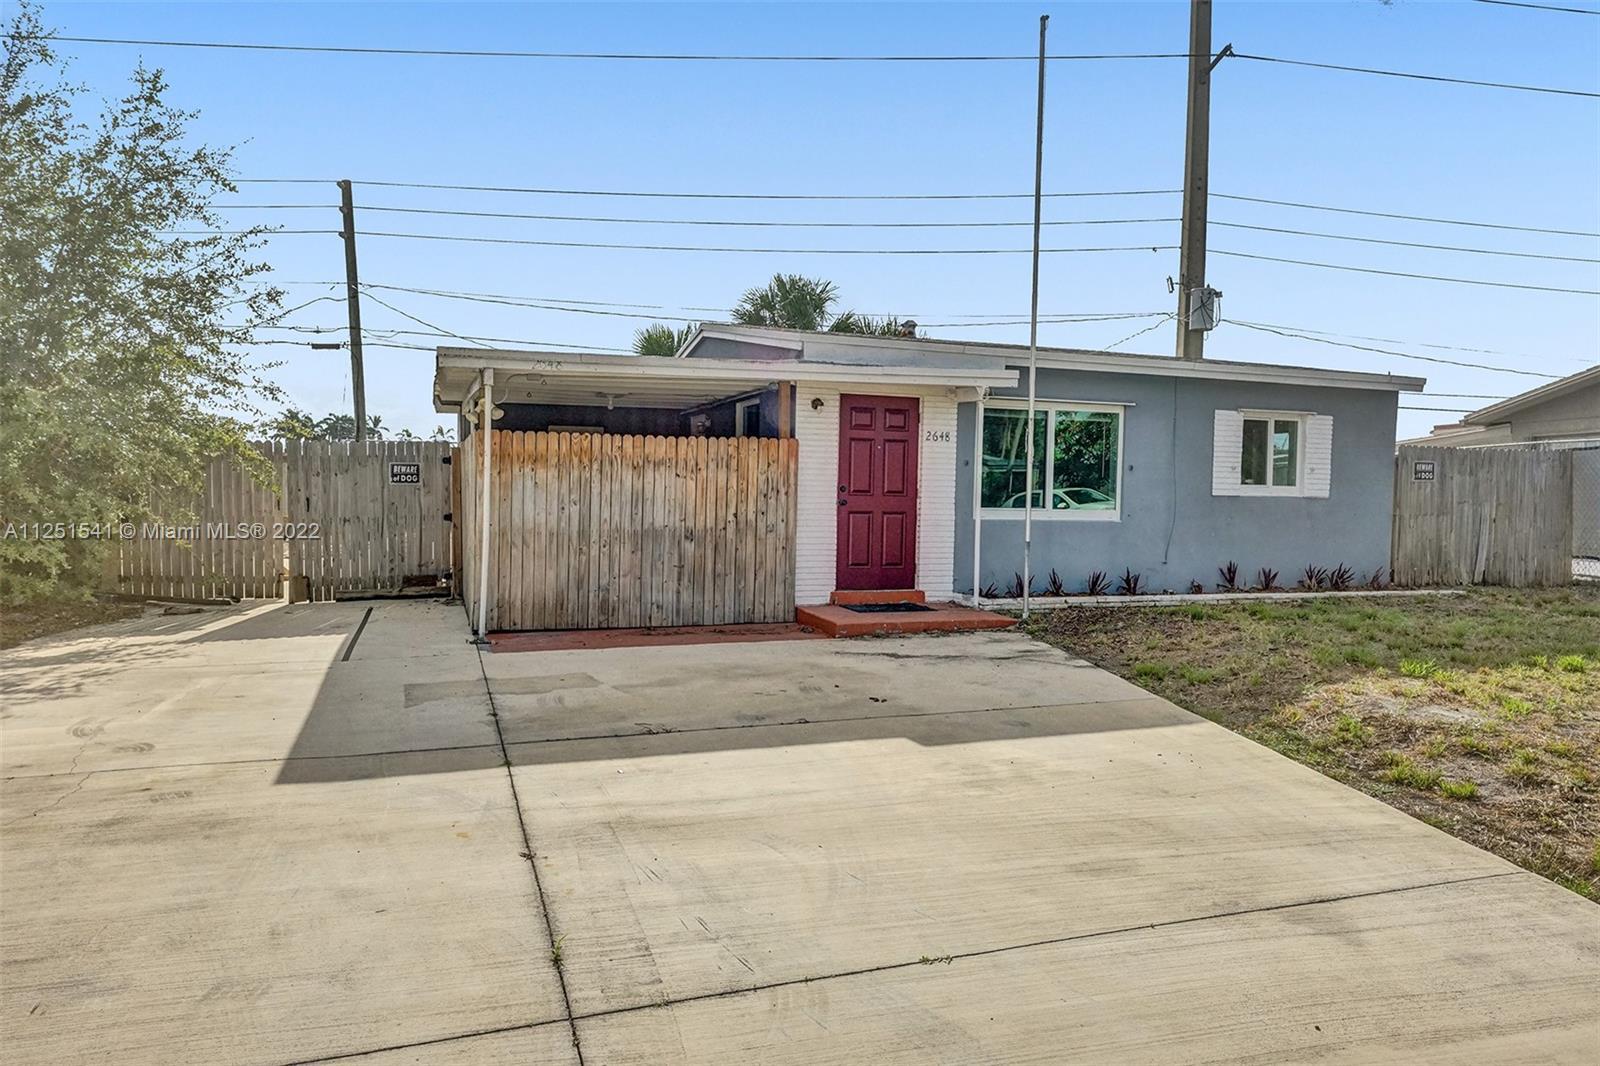 This 2 Bedroom 1 bathroom single family home  located in East Pompano Beach, close to Federal Hwy, m